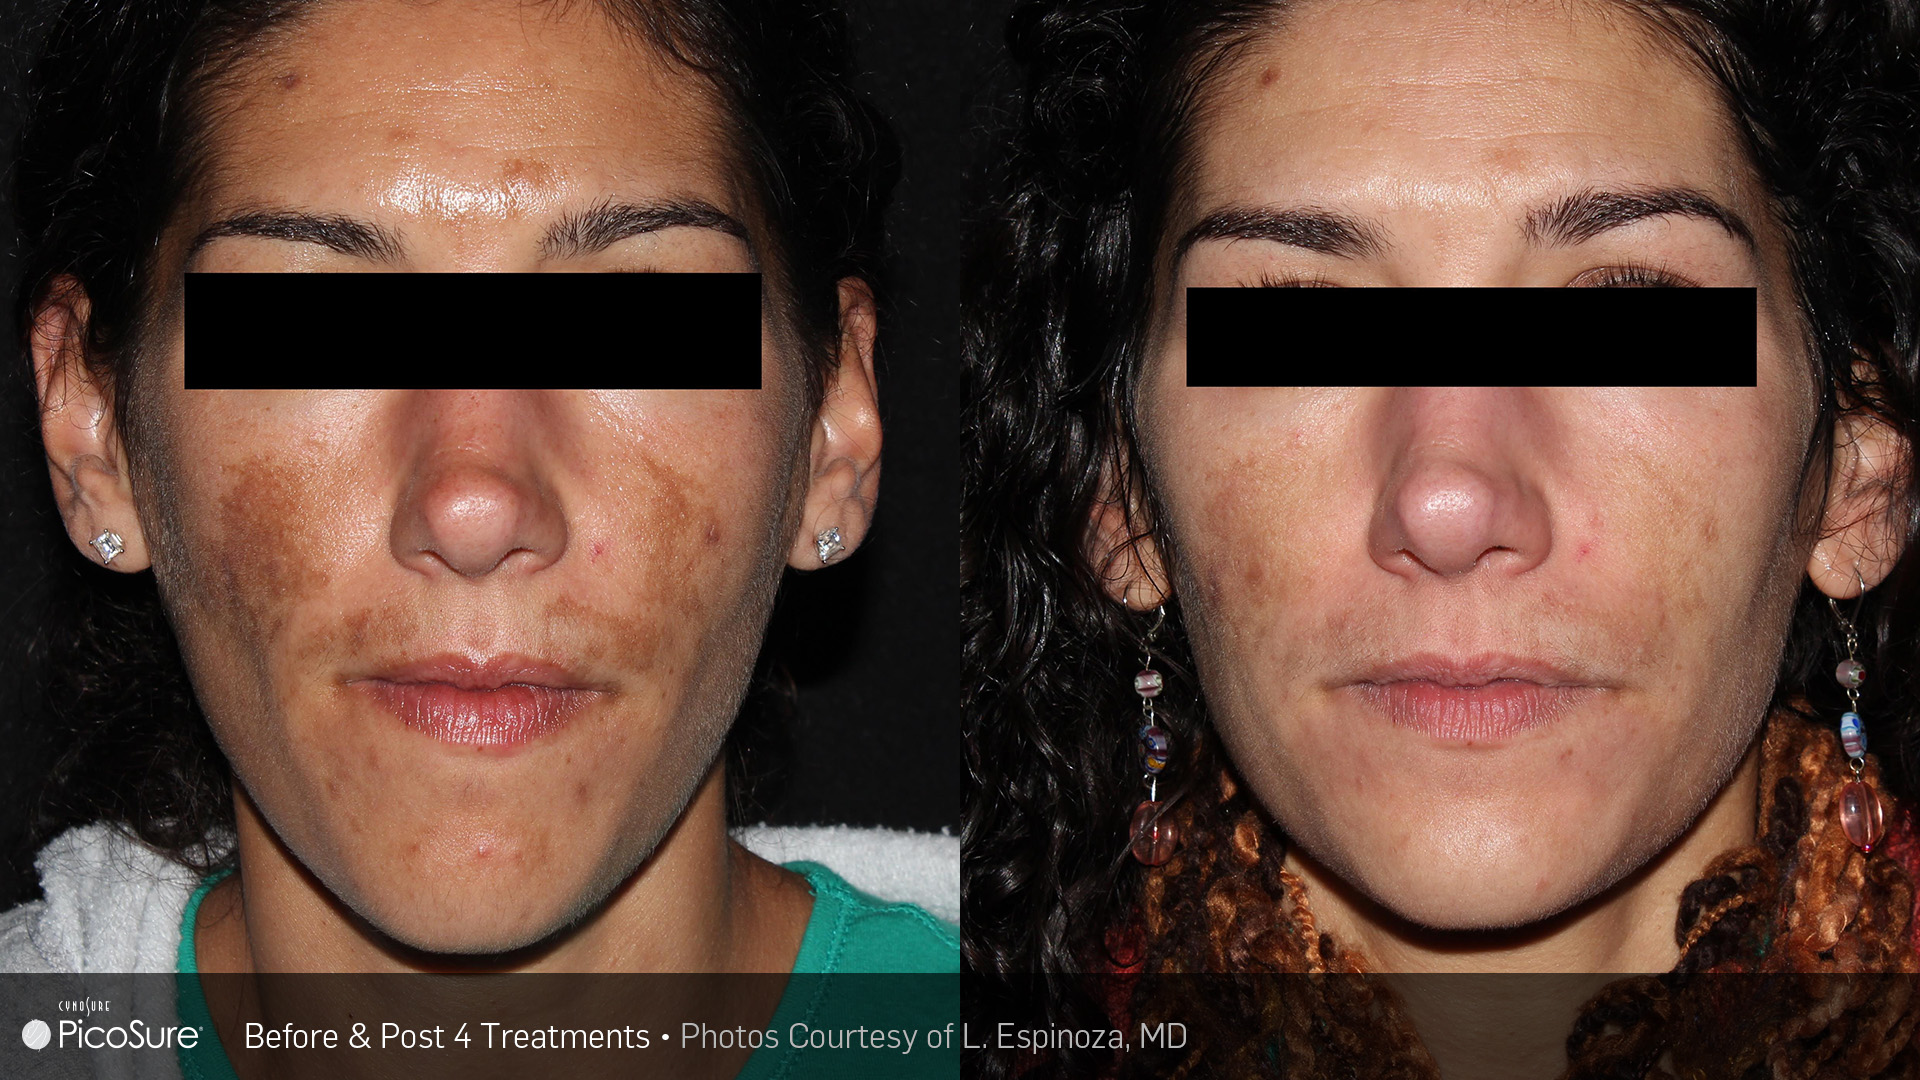 PicoSure before and after results